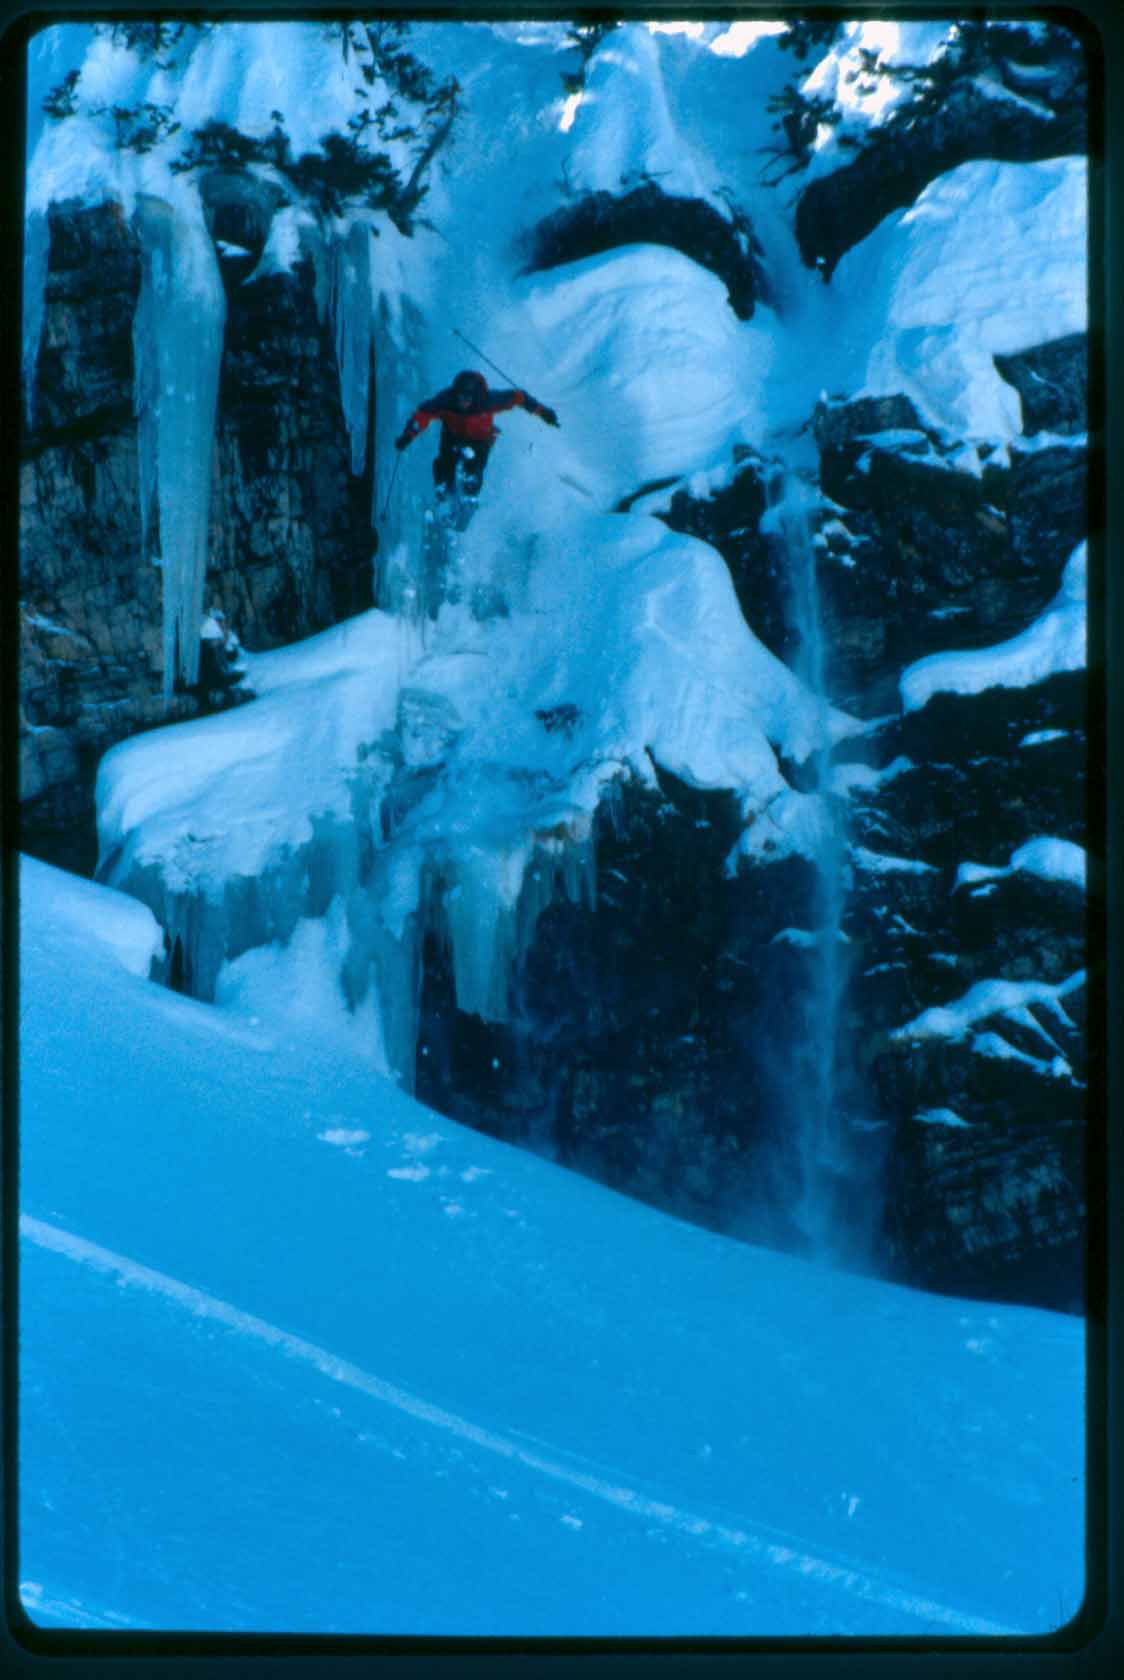 dropping the ice cliff